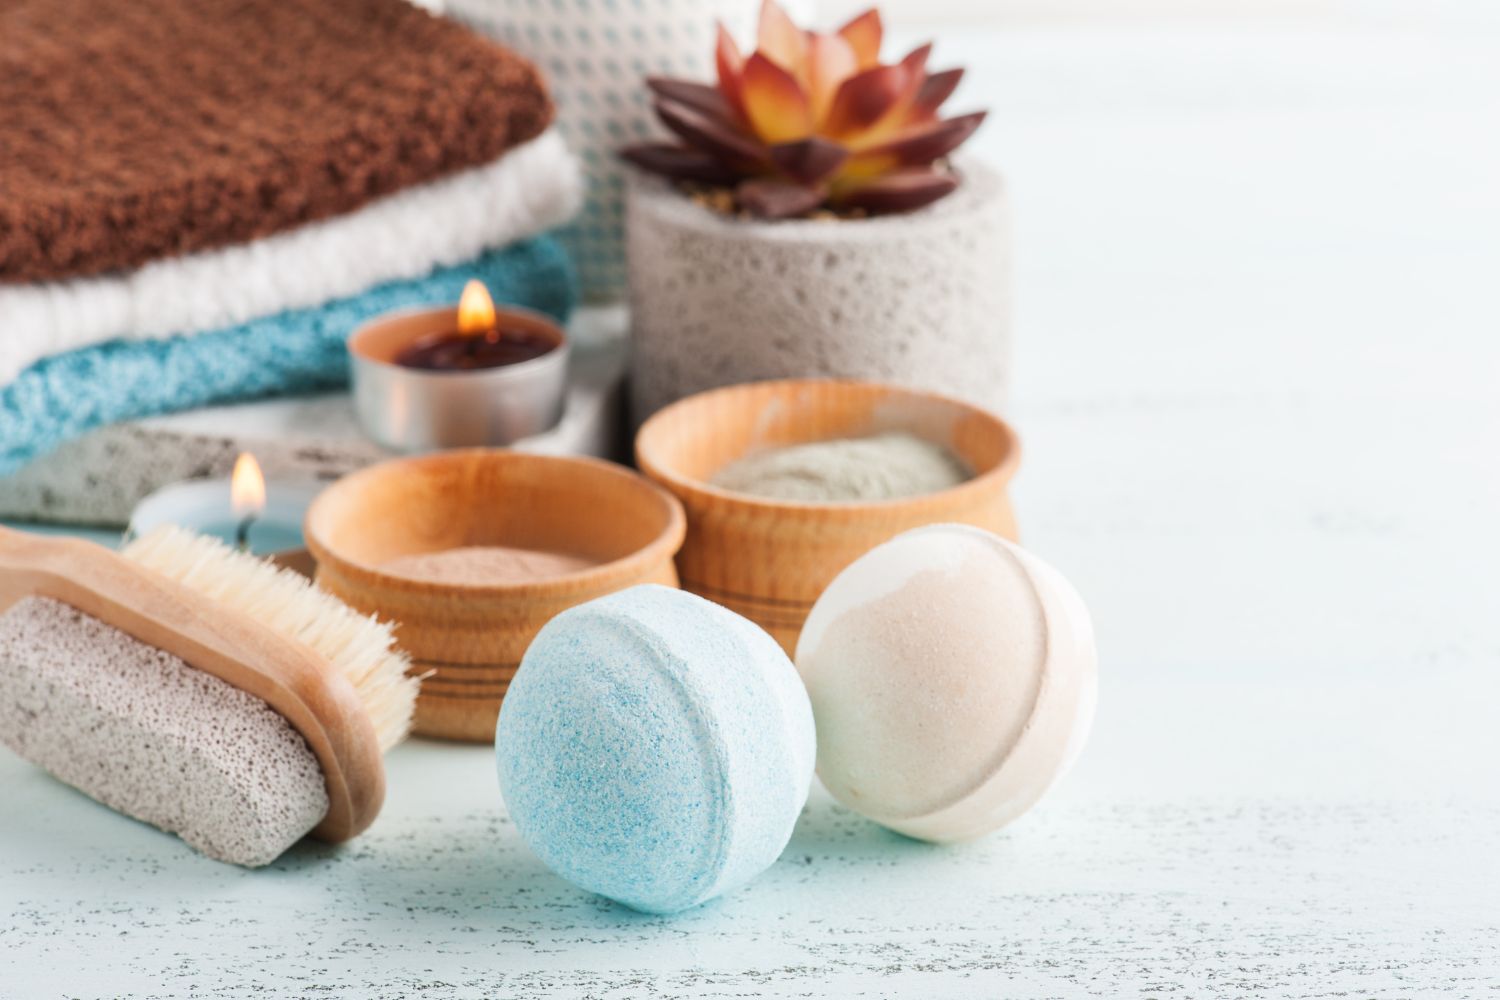 Moroccan clay on wooden bowl and spa essentials